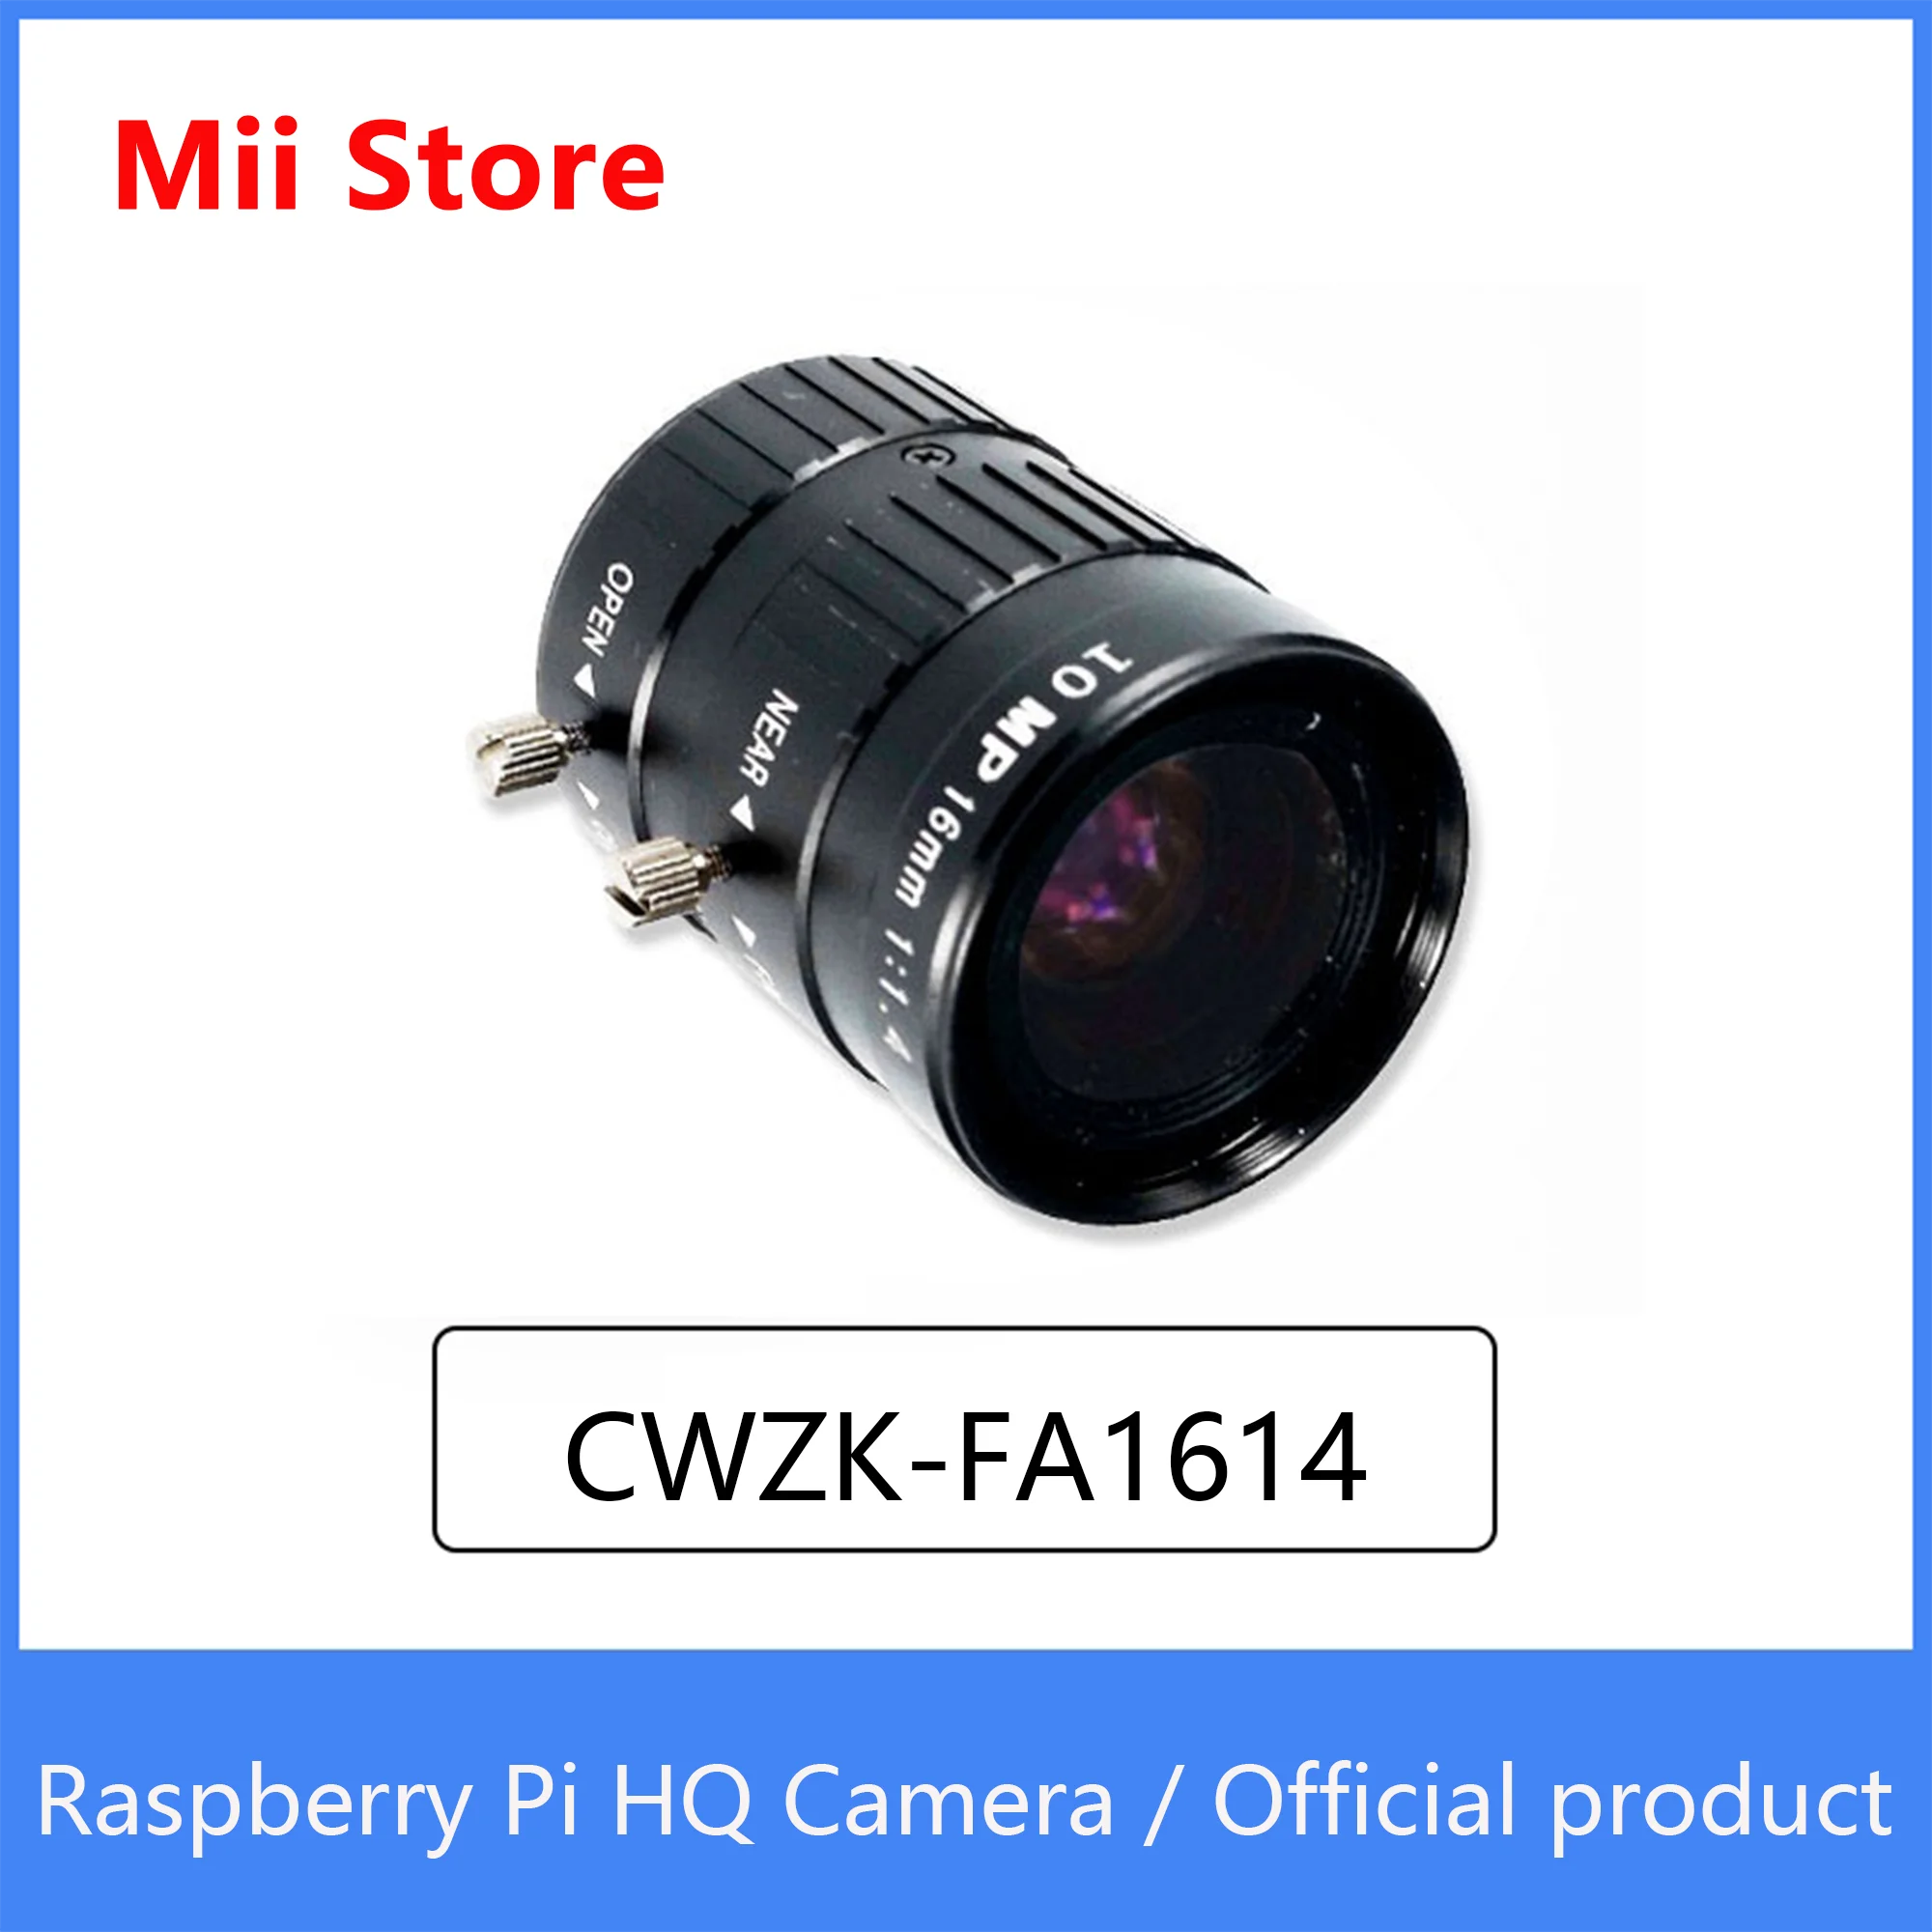 

Raspberry Pi HQ Camera Official product CWZK-FA1614 10MP 6MM Lens Sony IMX477 with adjustable back focus and support C-mount